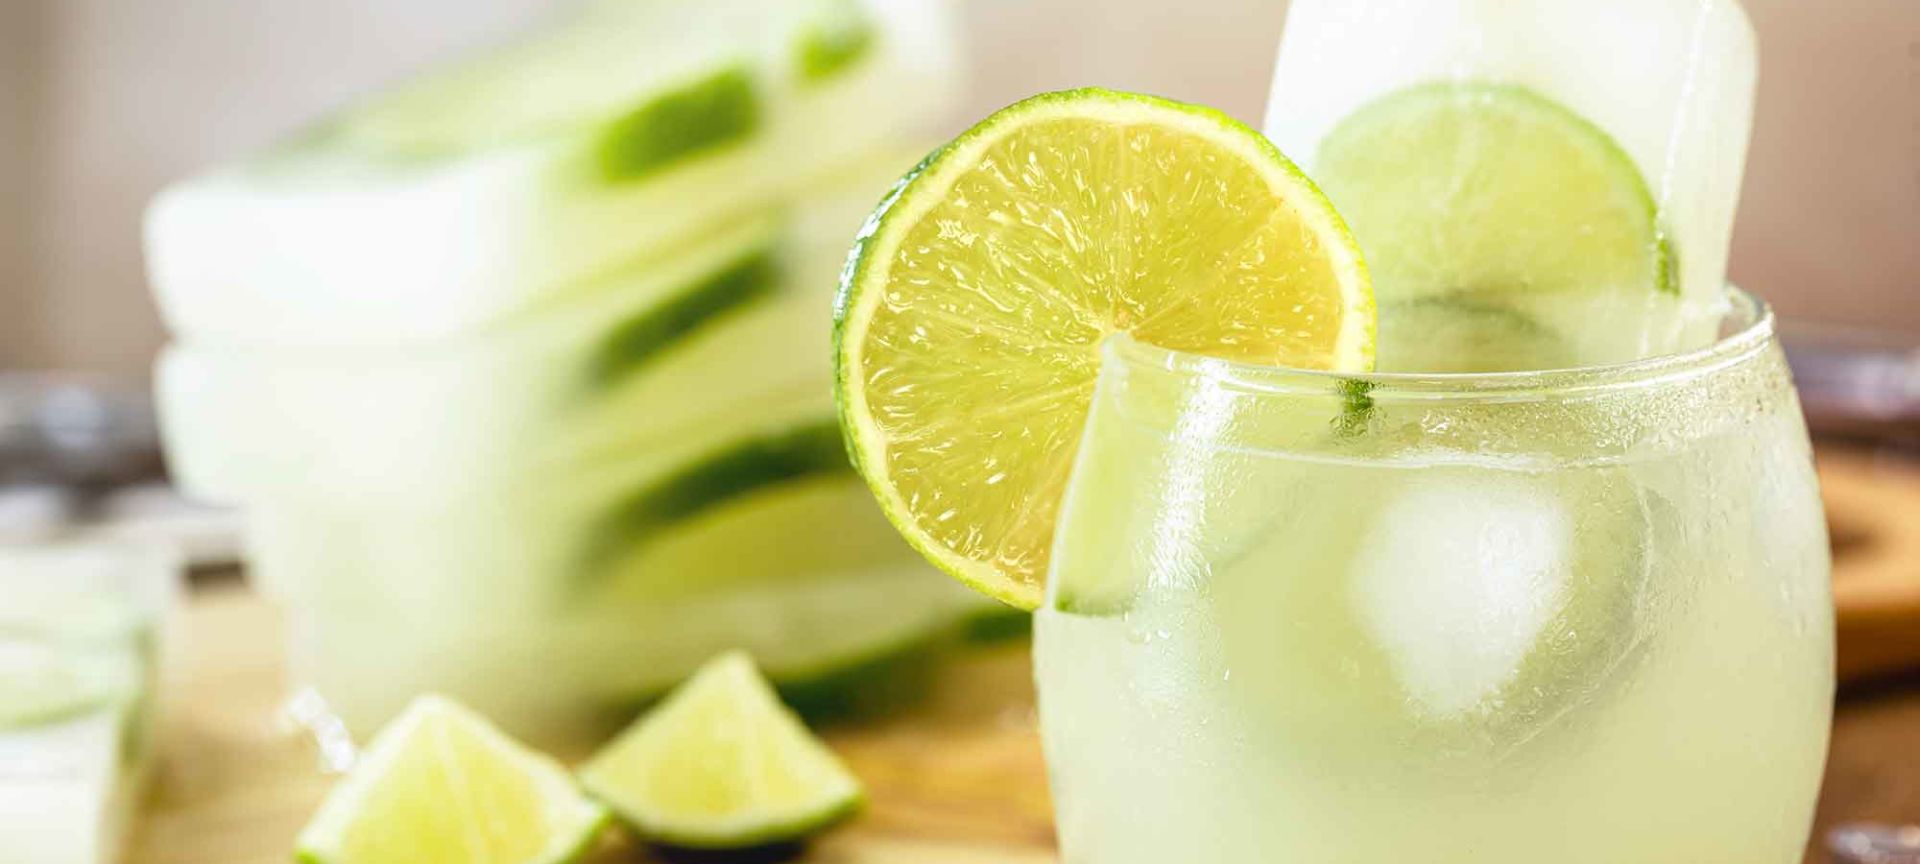 A Glass Of Lemonade With Limes And Slices Of Lemon